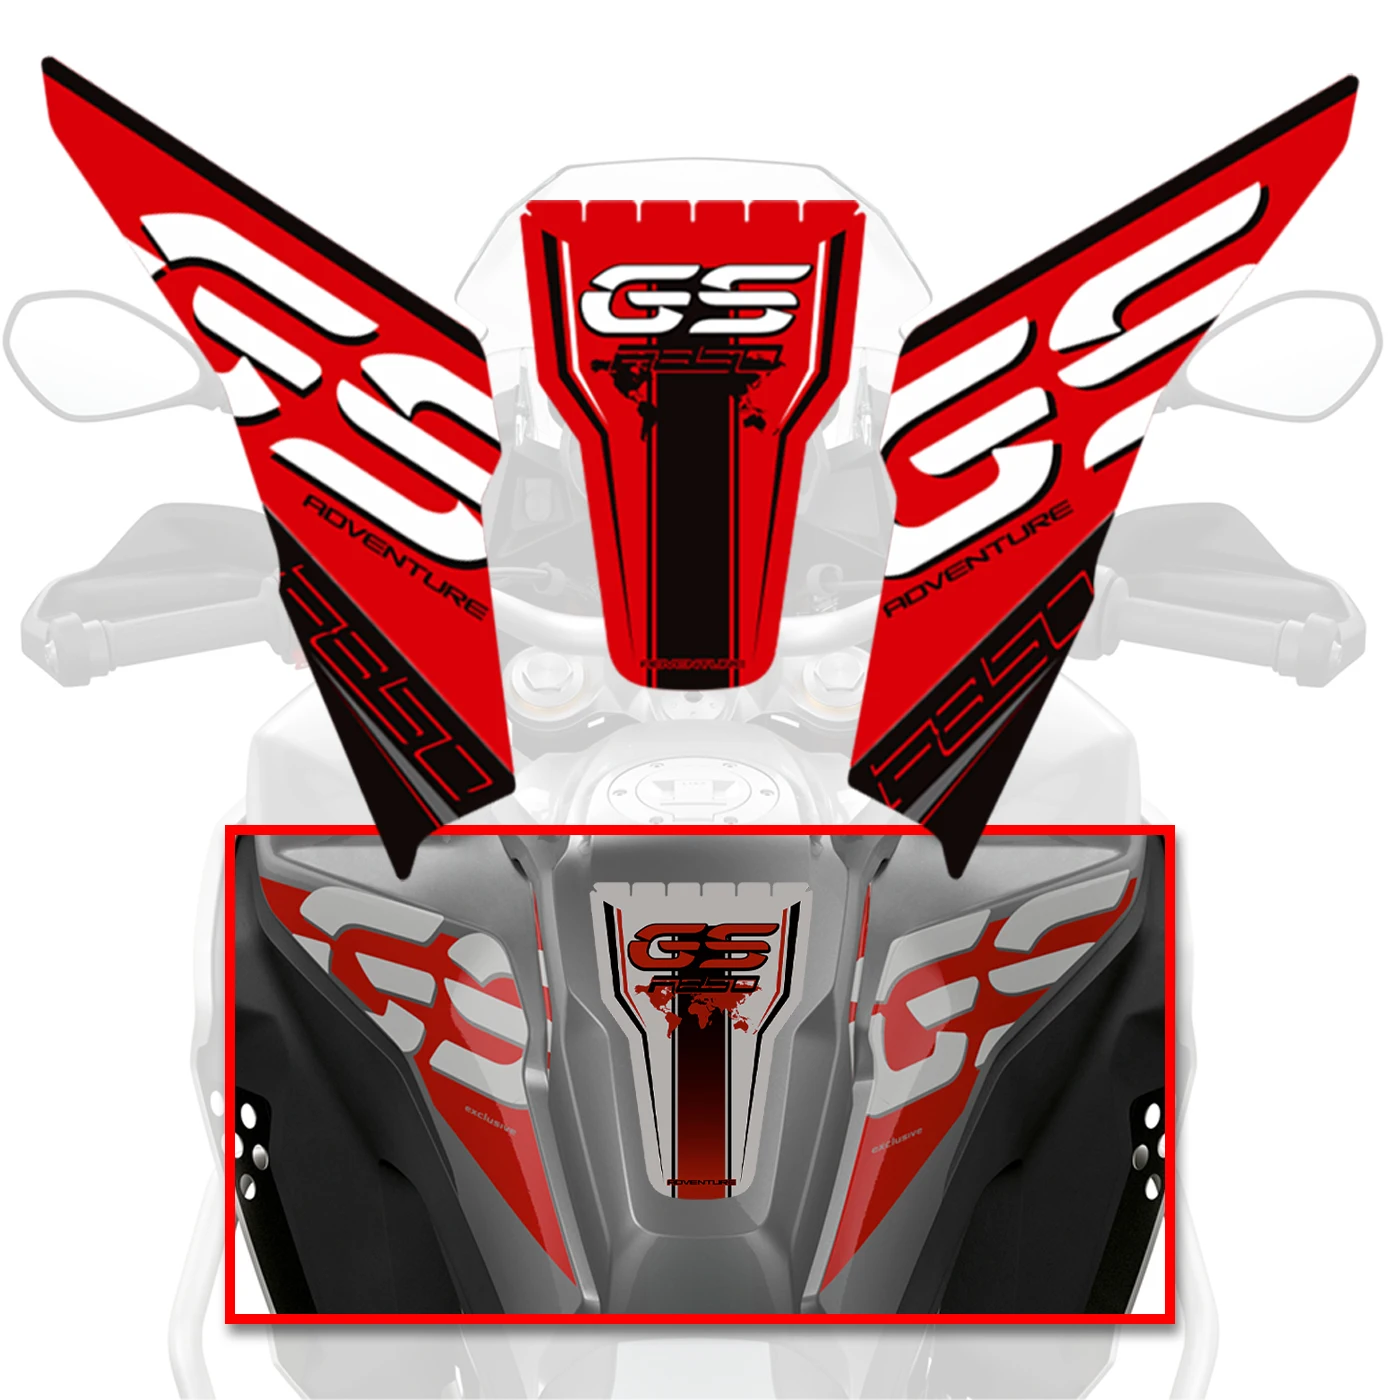 GS F850 F850 GS 850 GSA For BMW Protection Stickers Tank Pad Fairing Fender Gas Knee Adventure Tankpad 2019 2020 2021 2022